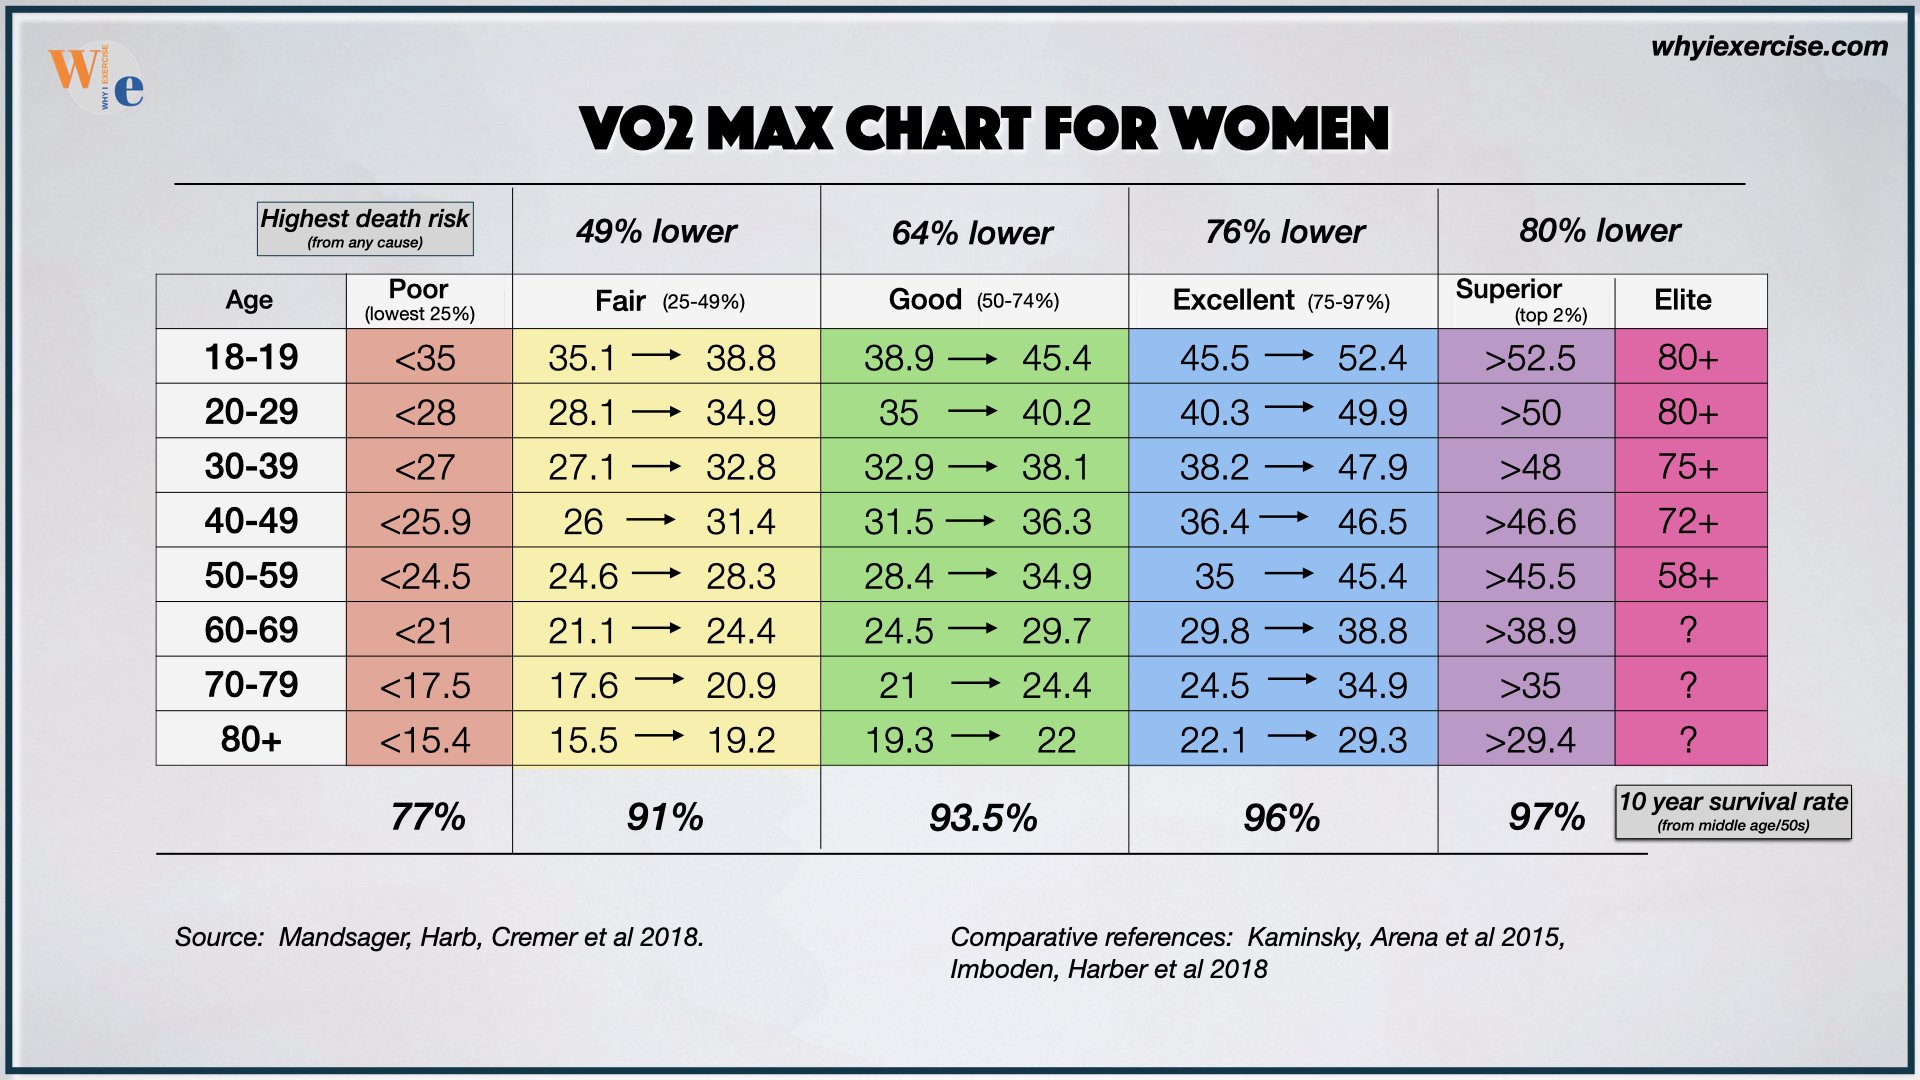 Vo2 max chart for women, healthy standard by age group